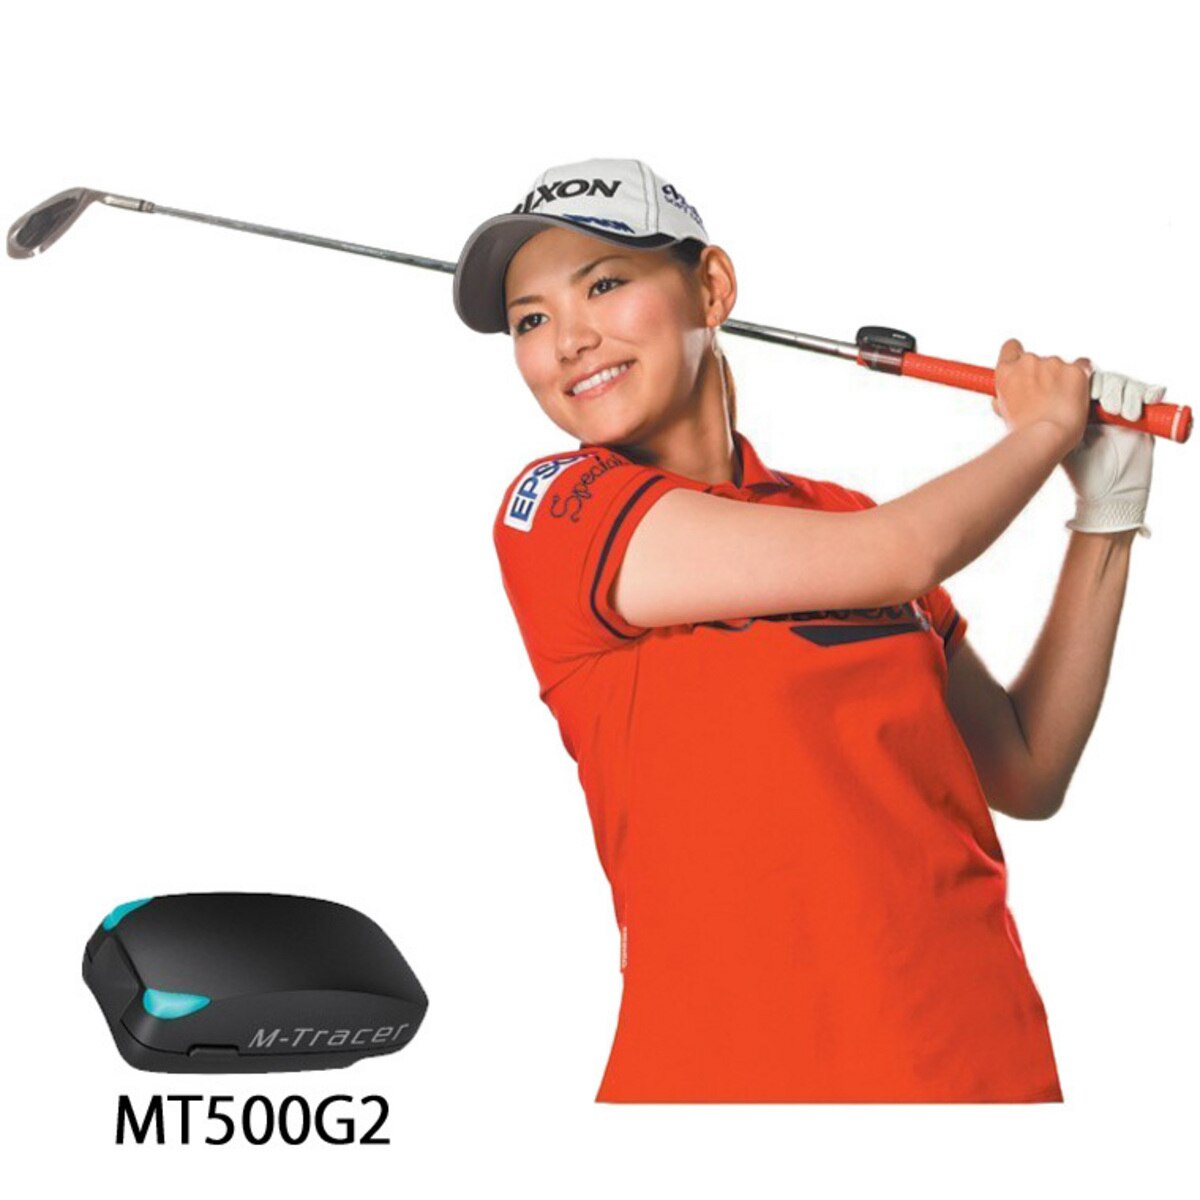 M-Tracer for Golf MT500G2